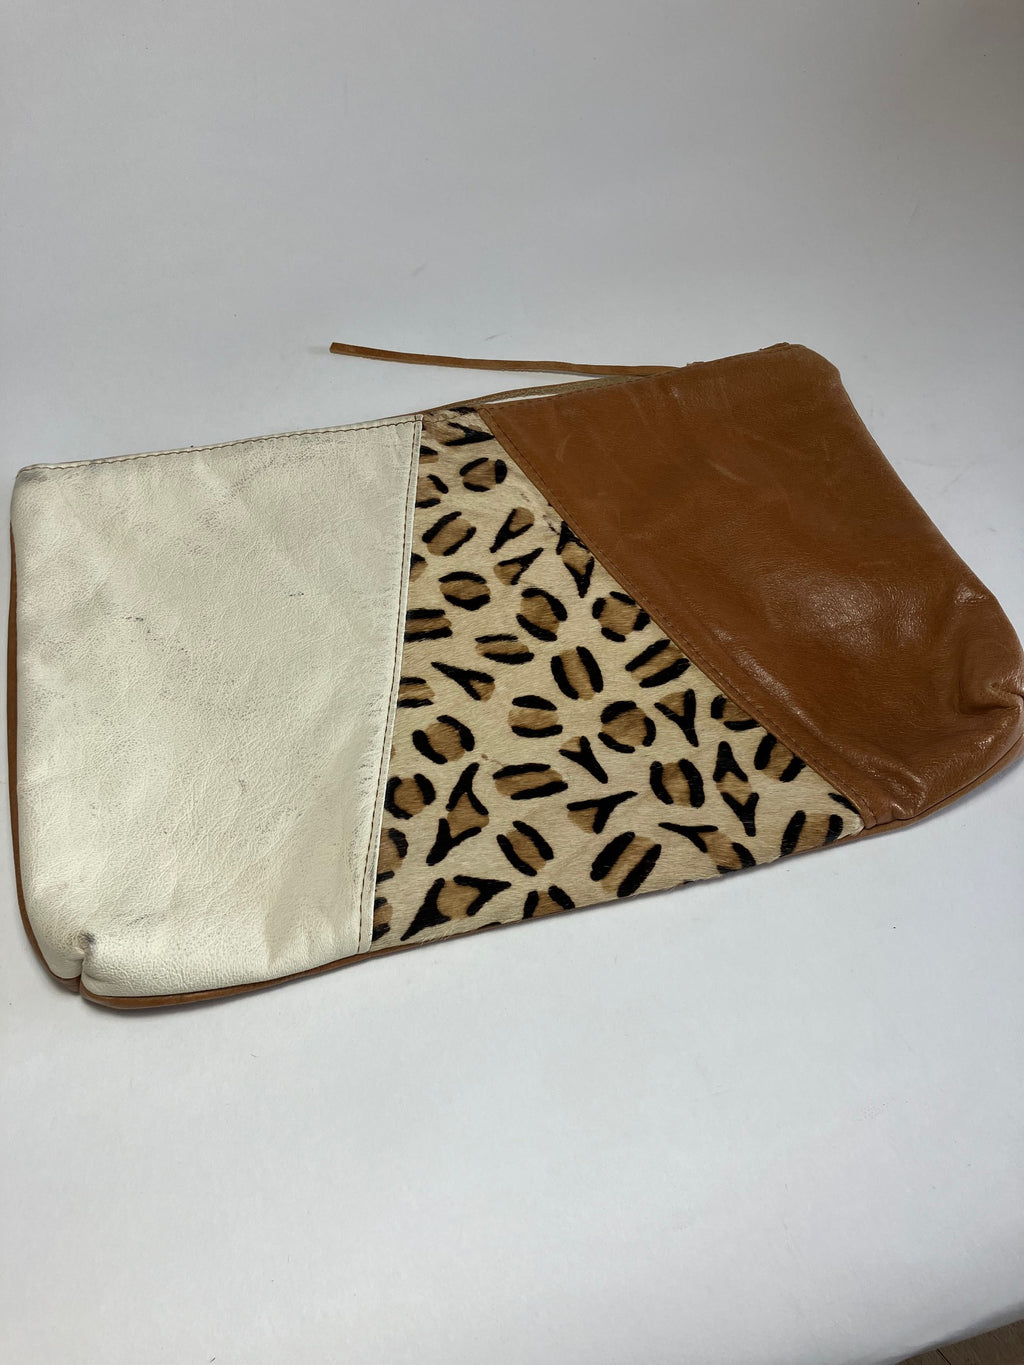 ONE OF A KIND - SAMPLE Leather clutch bag tan brown, leopard and ivory